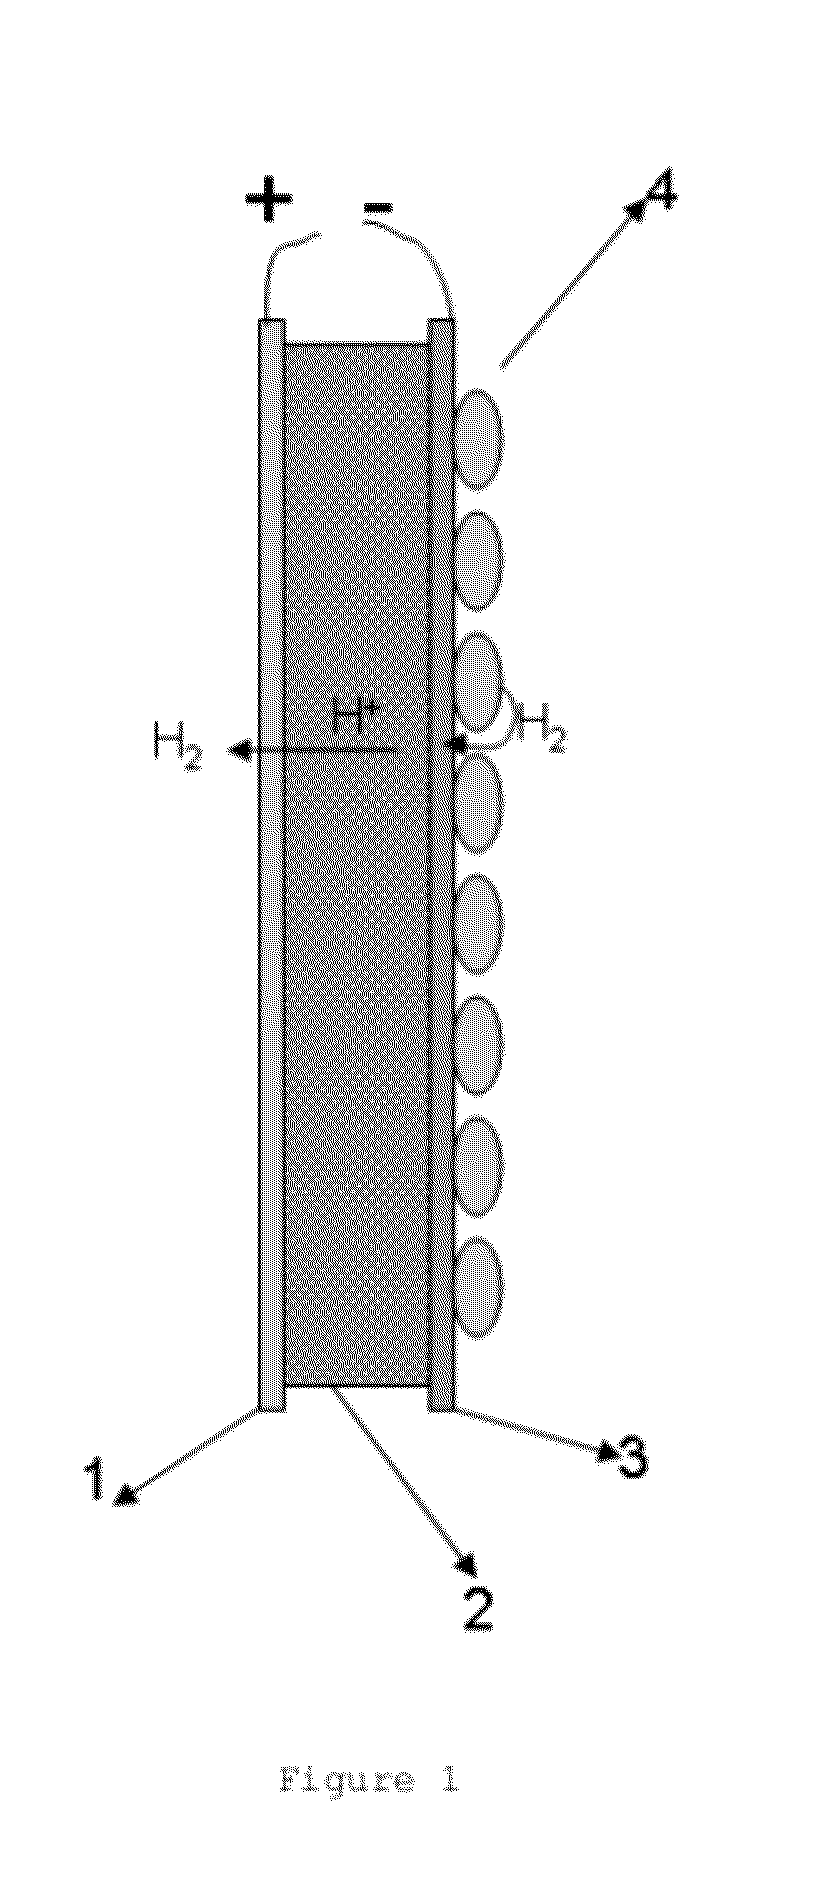 Hydrogen or oxygen electrochemical pumping catalytic membrane reactor and its applications